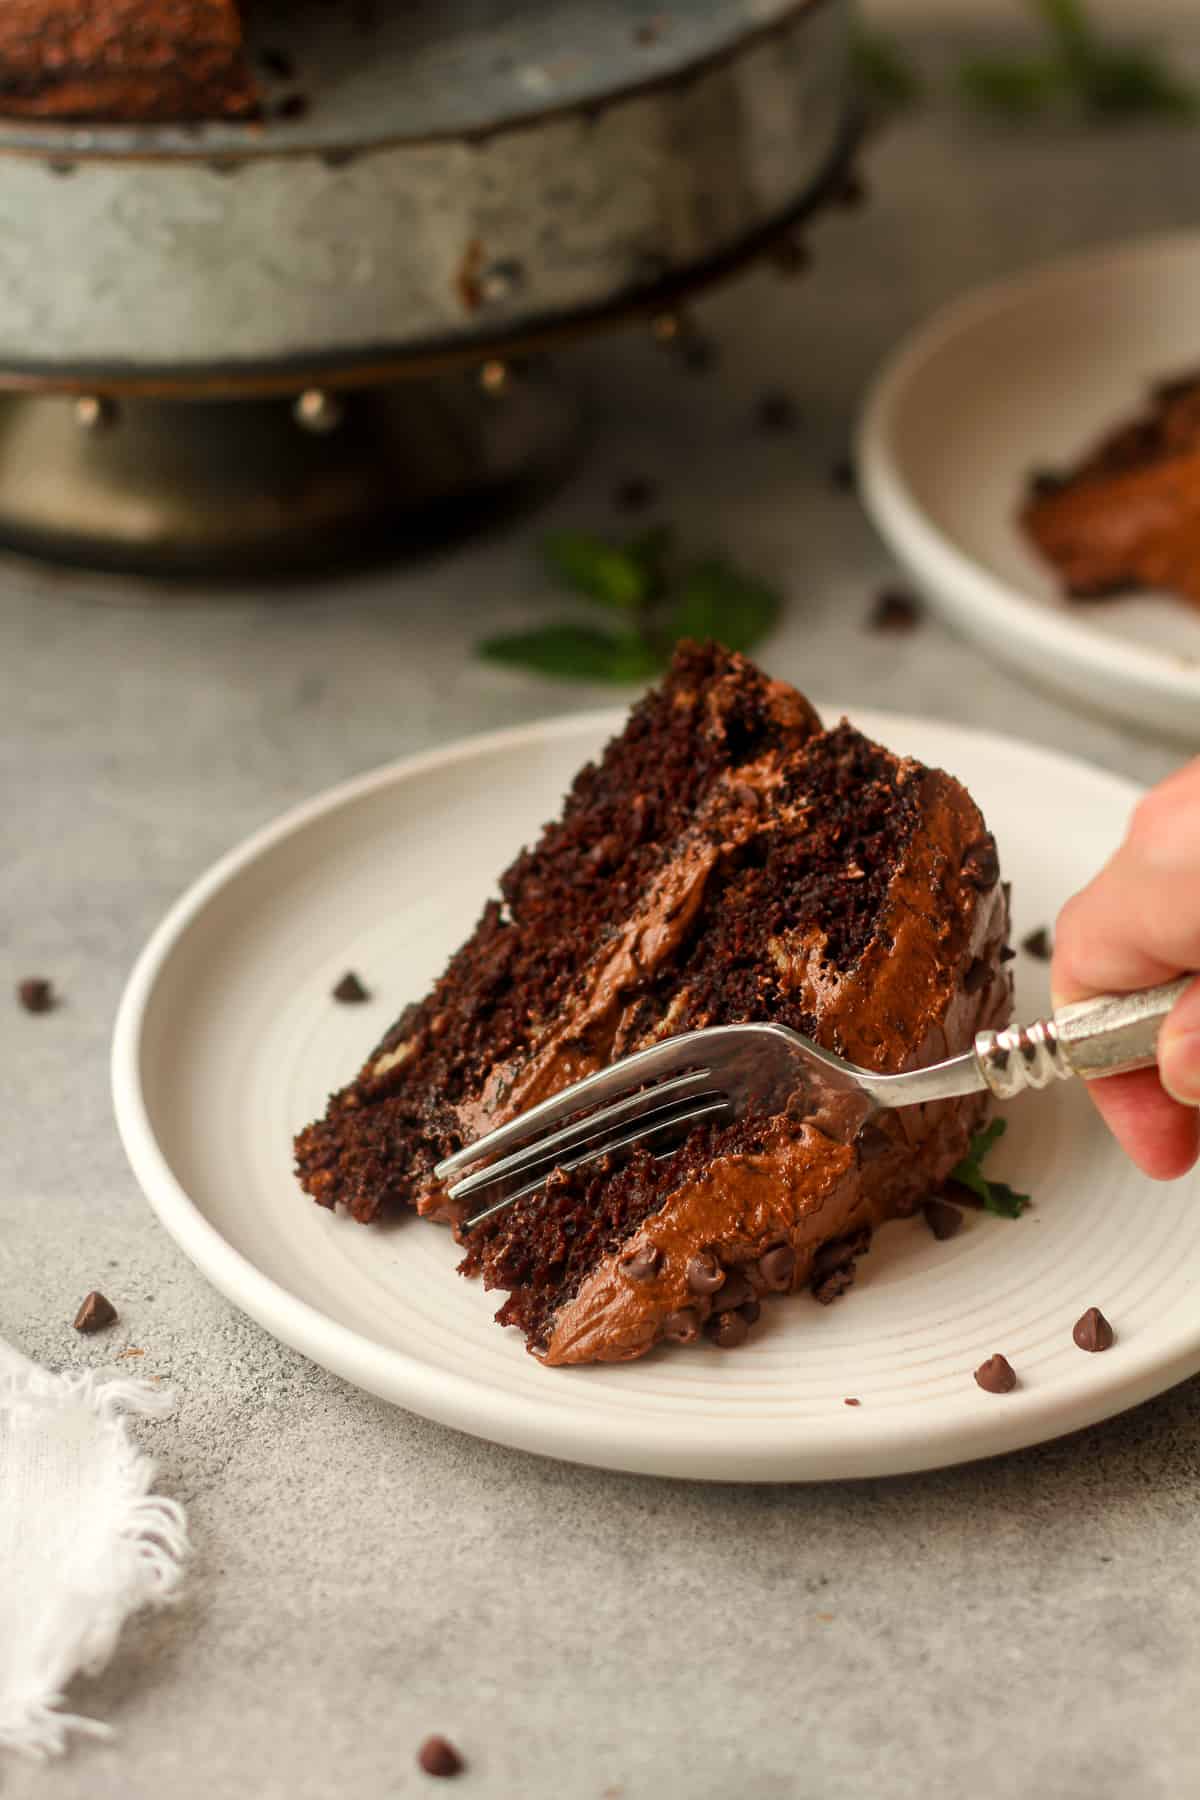 A fork digging into a piece of chocolate cake.